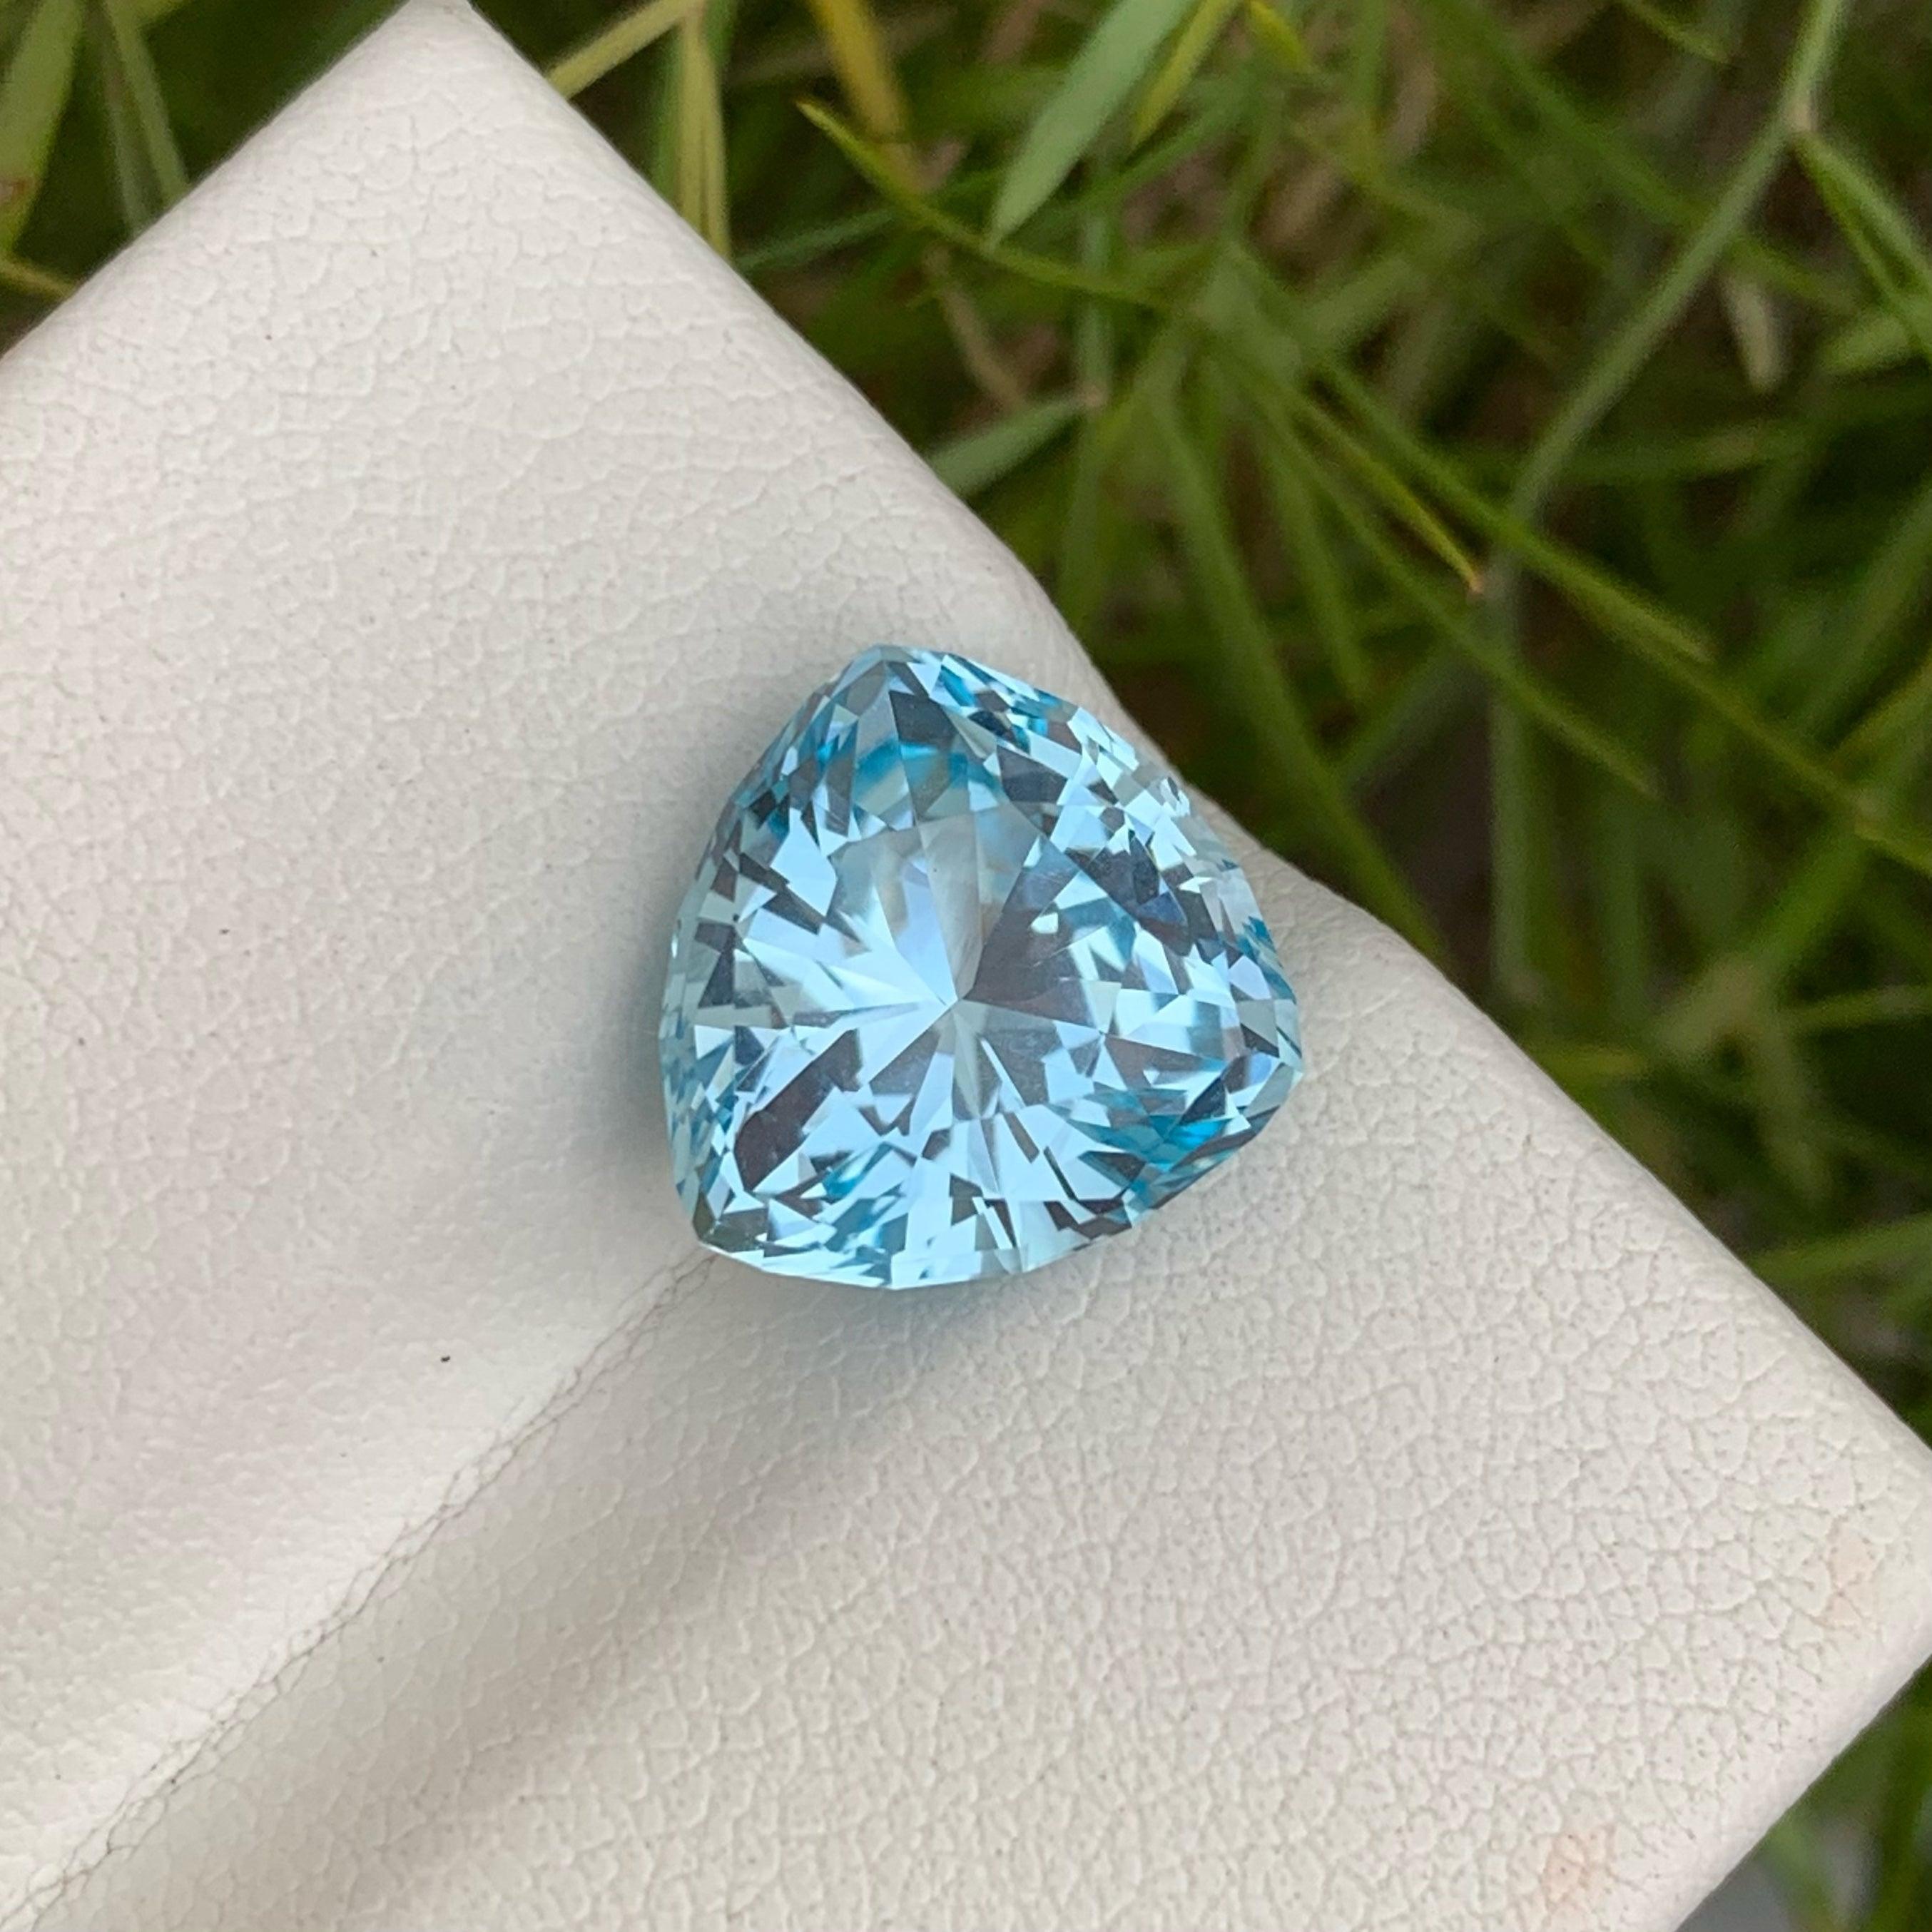 Pretty Swiss Blue Topaz Loose Gemstone, available For Sale At Wholesale Price Natural High Quality 7.55 Carats Loupe Clean Clarity Heated Topaz From Madagascar. 
Product Information:
GEMSTONE NAME: Pretty Swiss Blue Topaz Loose Gemstone
WEIGHT:	7.55